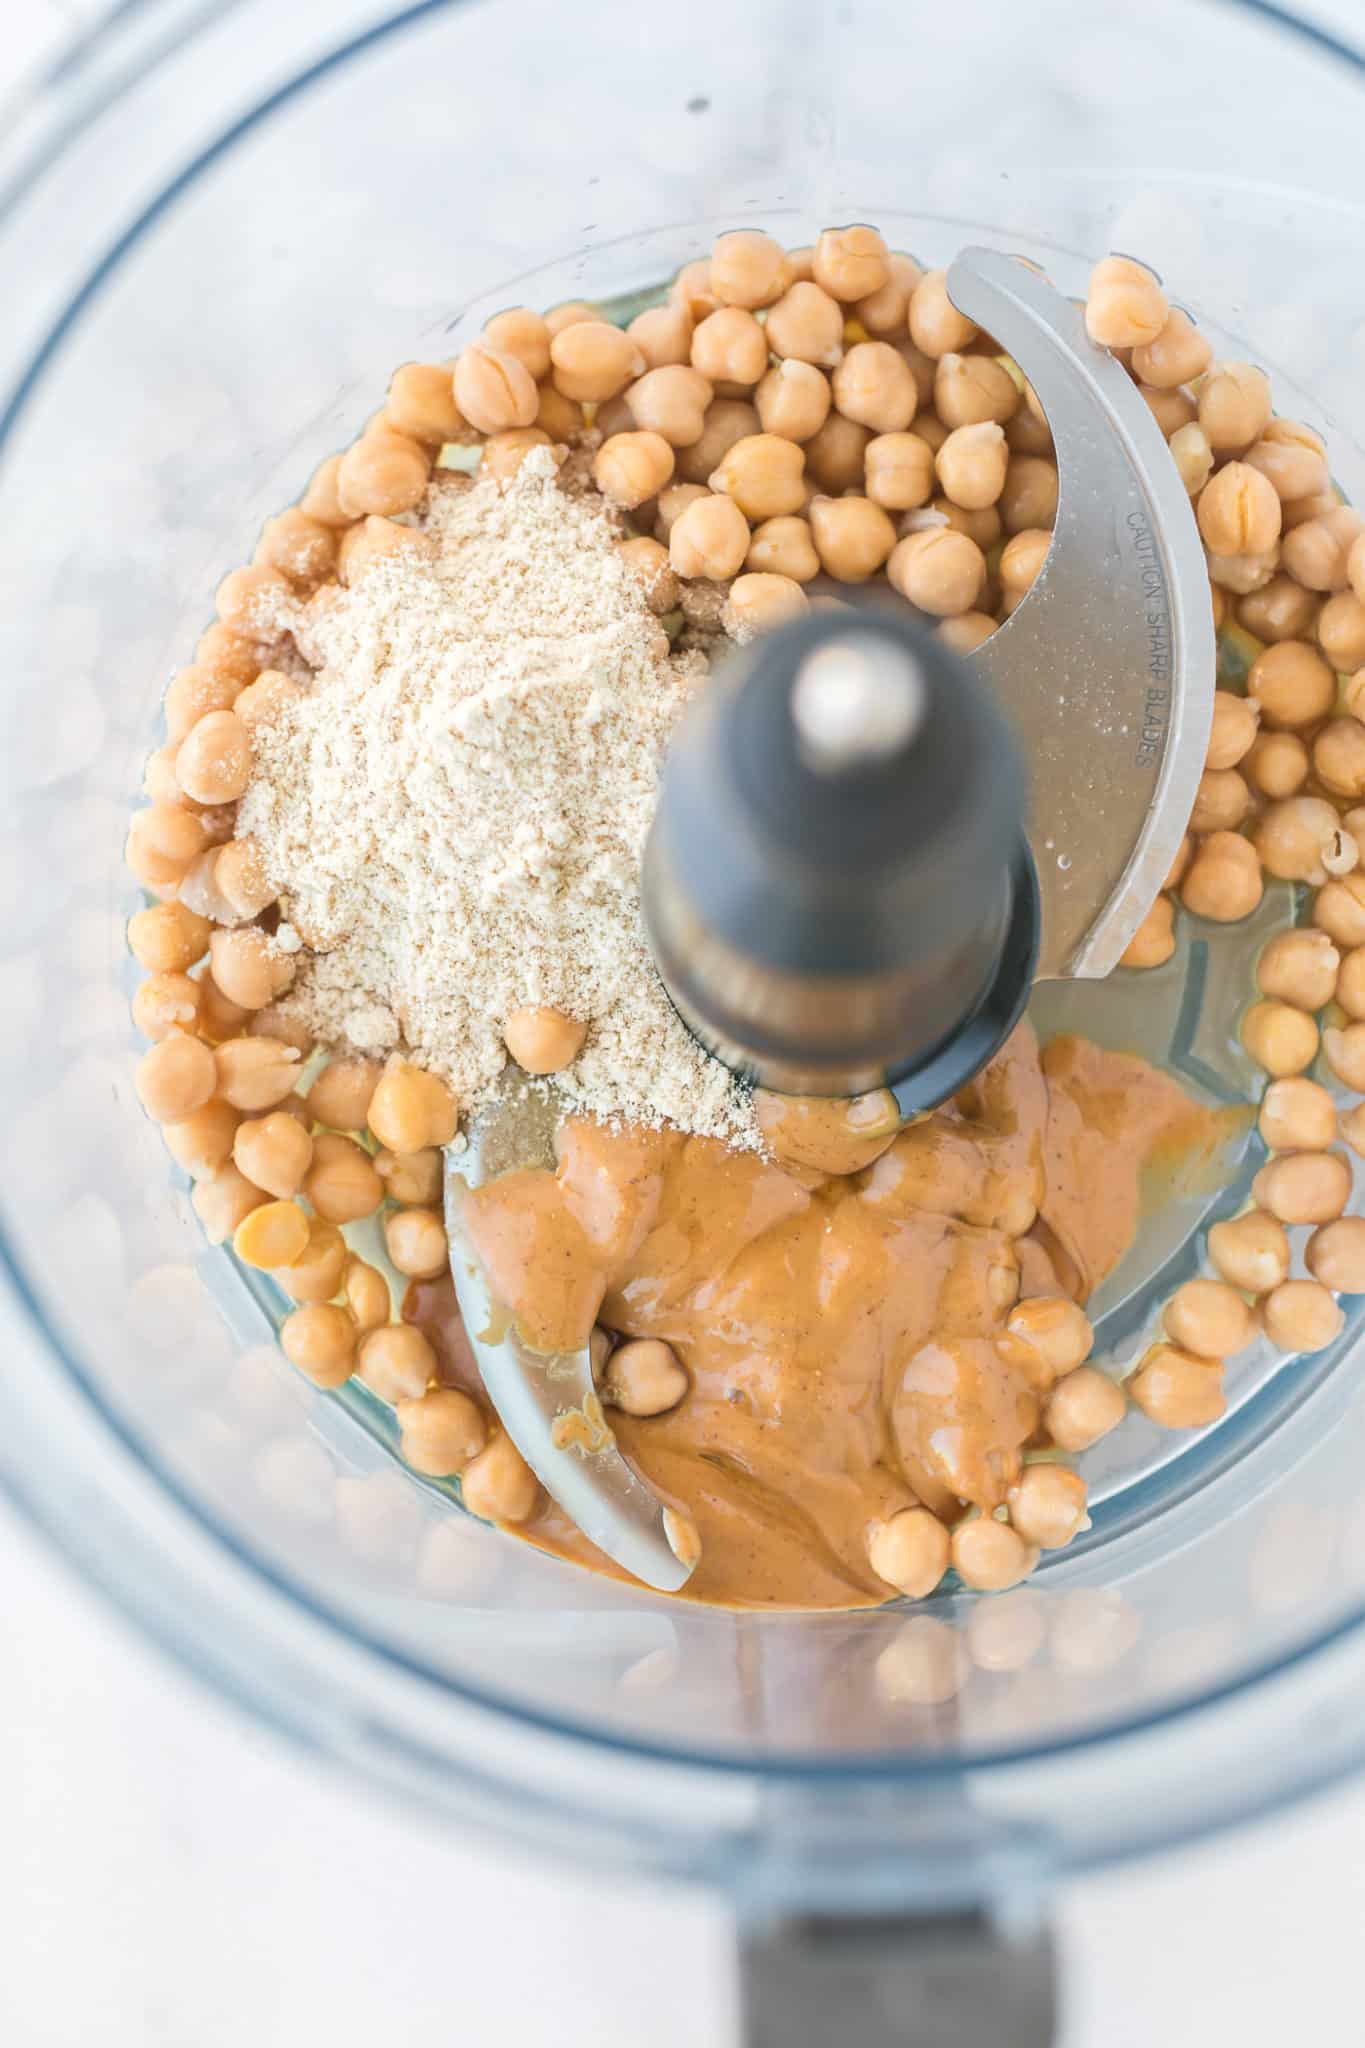 ingredients for chickpea cookie dough in a food processor